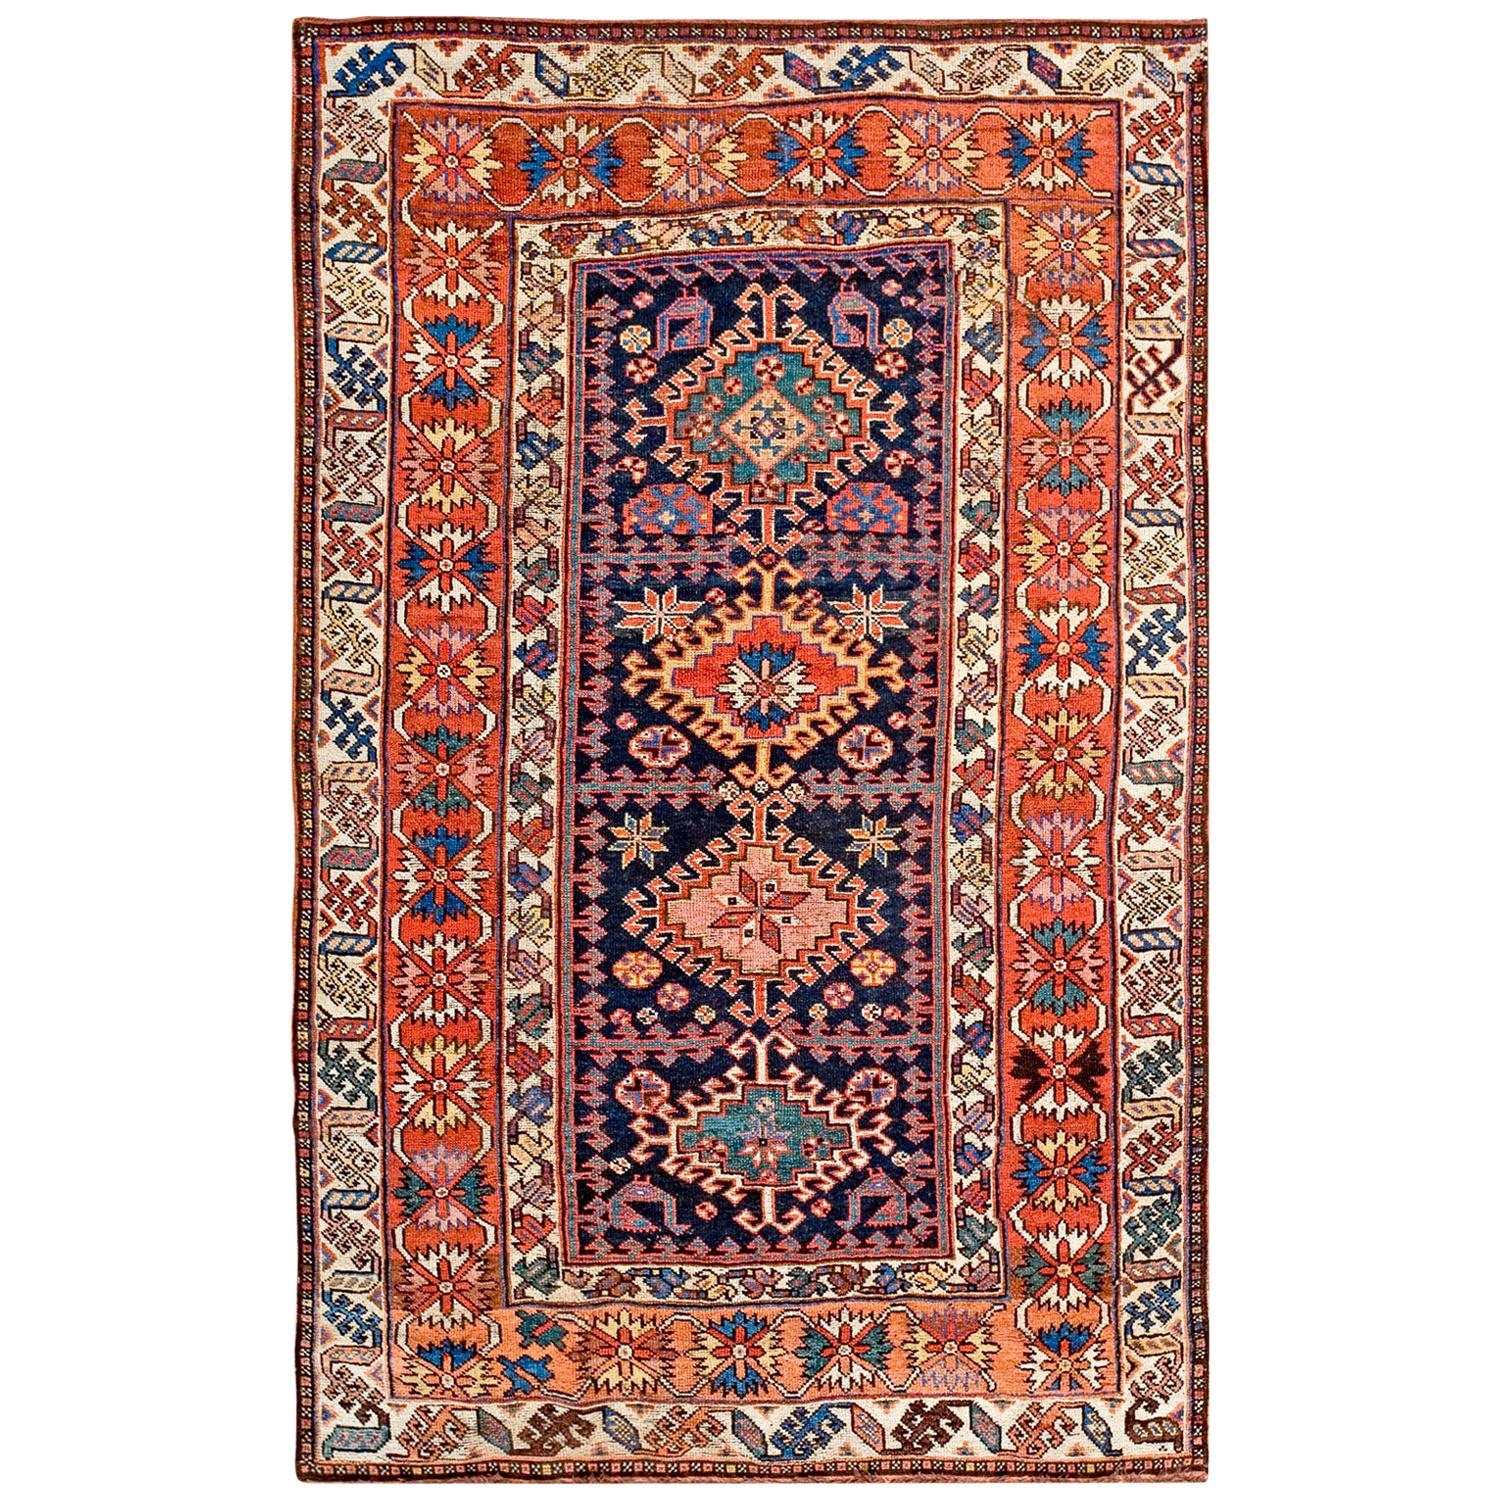 Early 20th Century N.W. Persian Carpet ( 4' x 6'4" - 122 x 193 ) For Sale